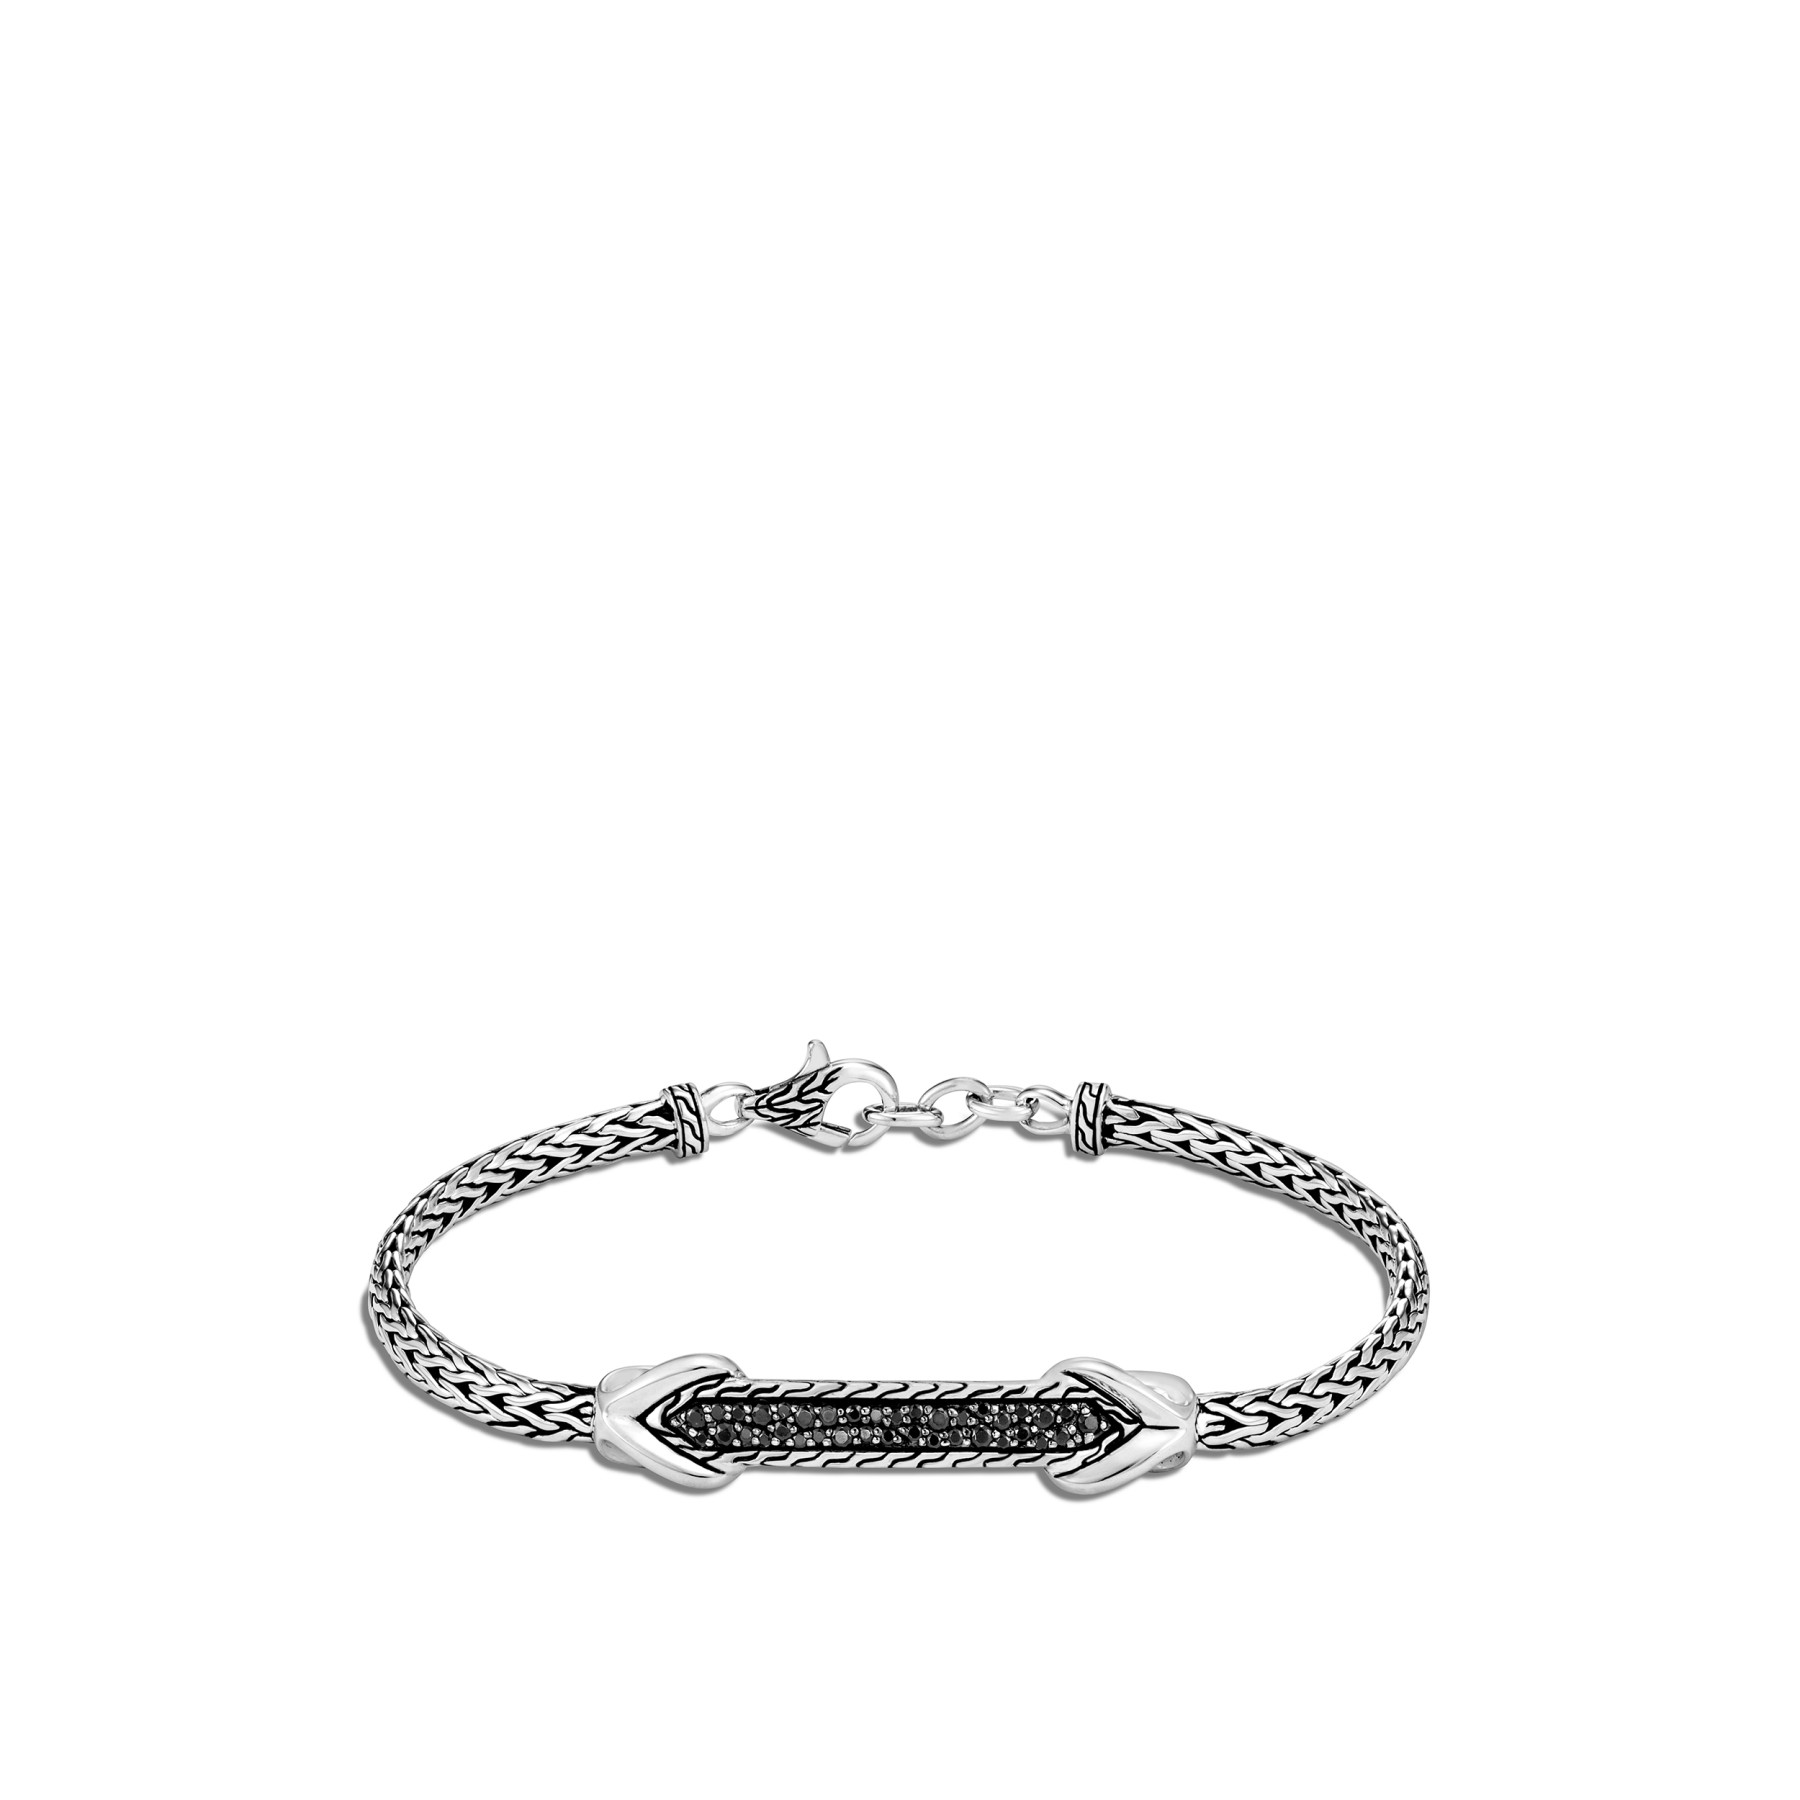 John Hardy Asli Classic Chain Silver and Black Bracelet –3.5mm front view